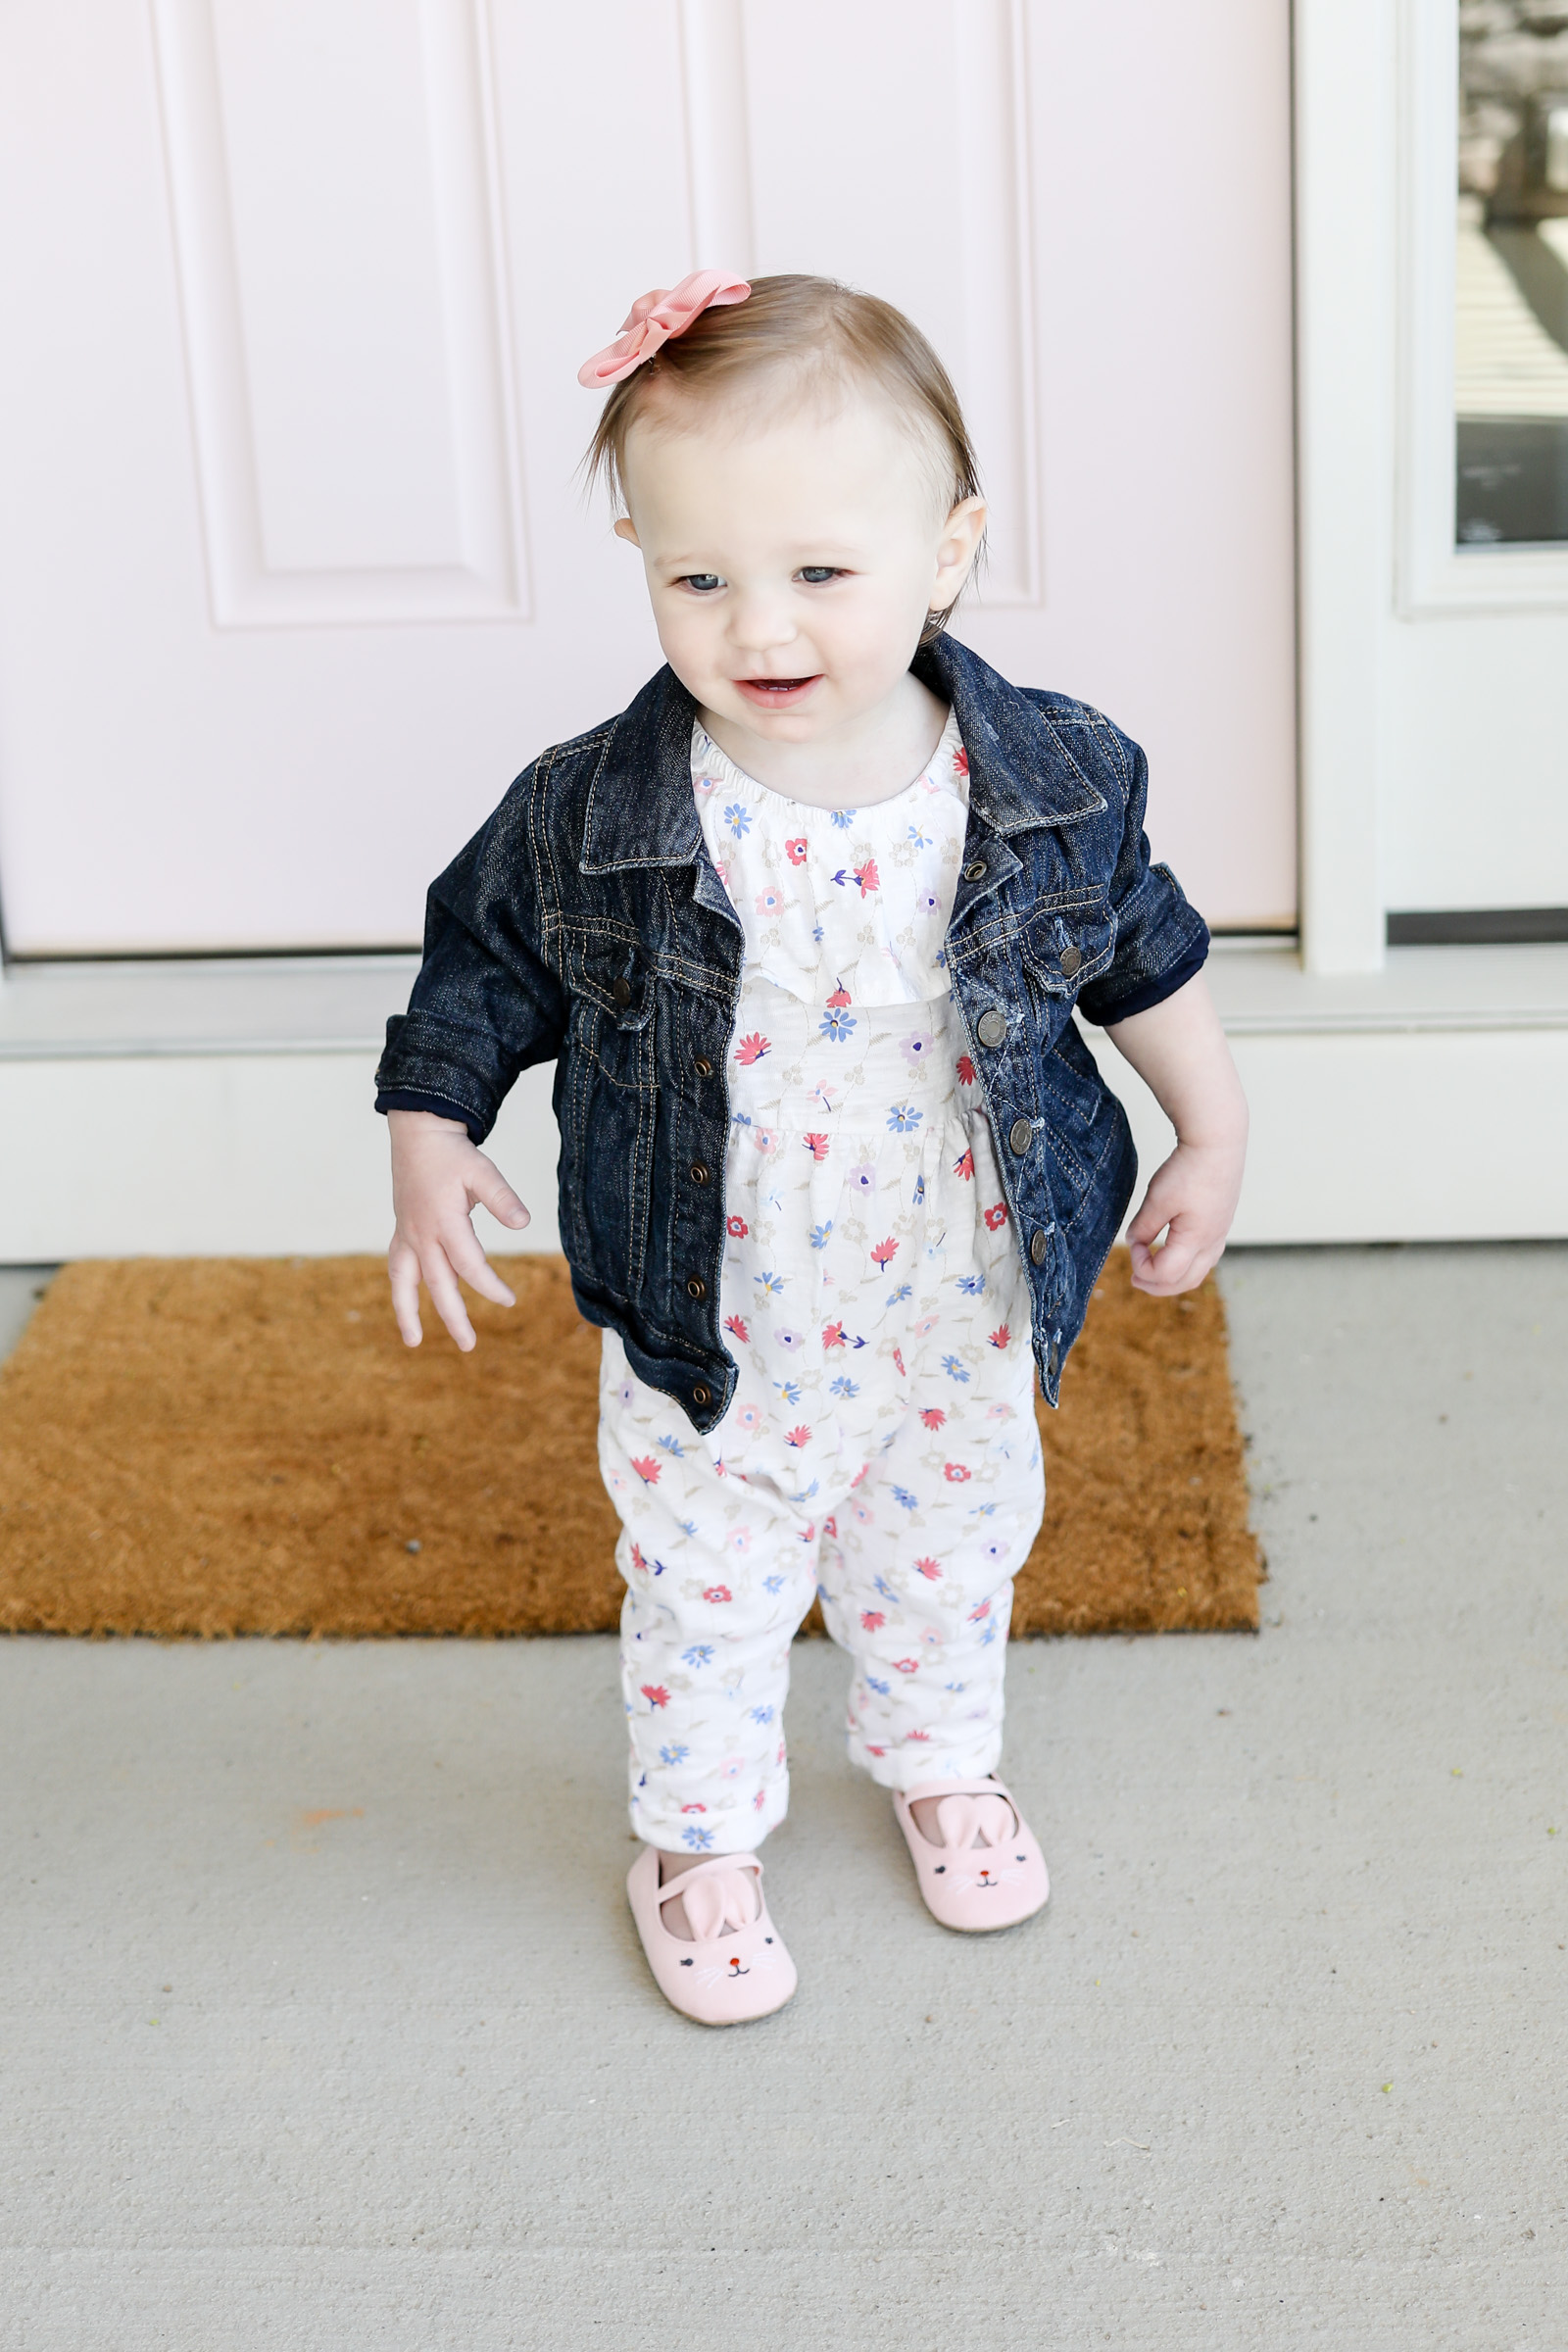 Dressing Little Girls | Spring Styles from Old Navy